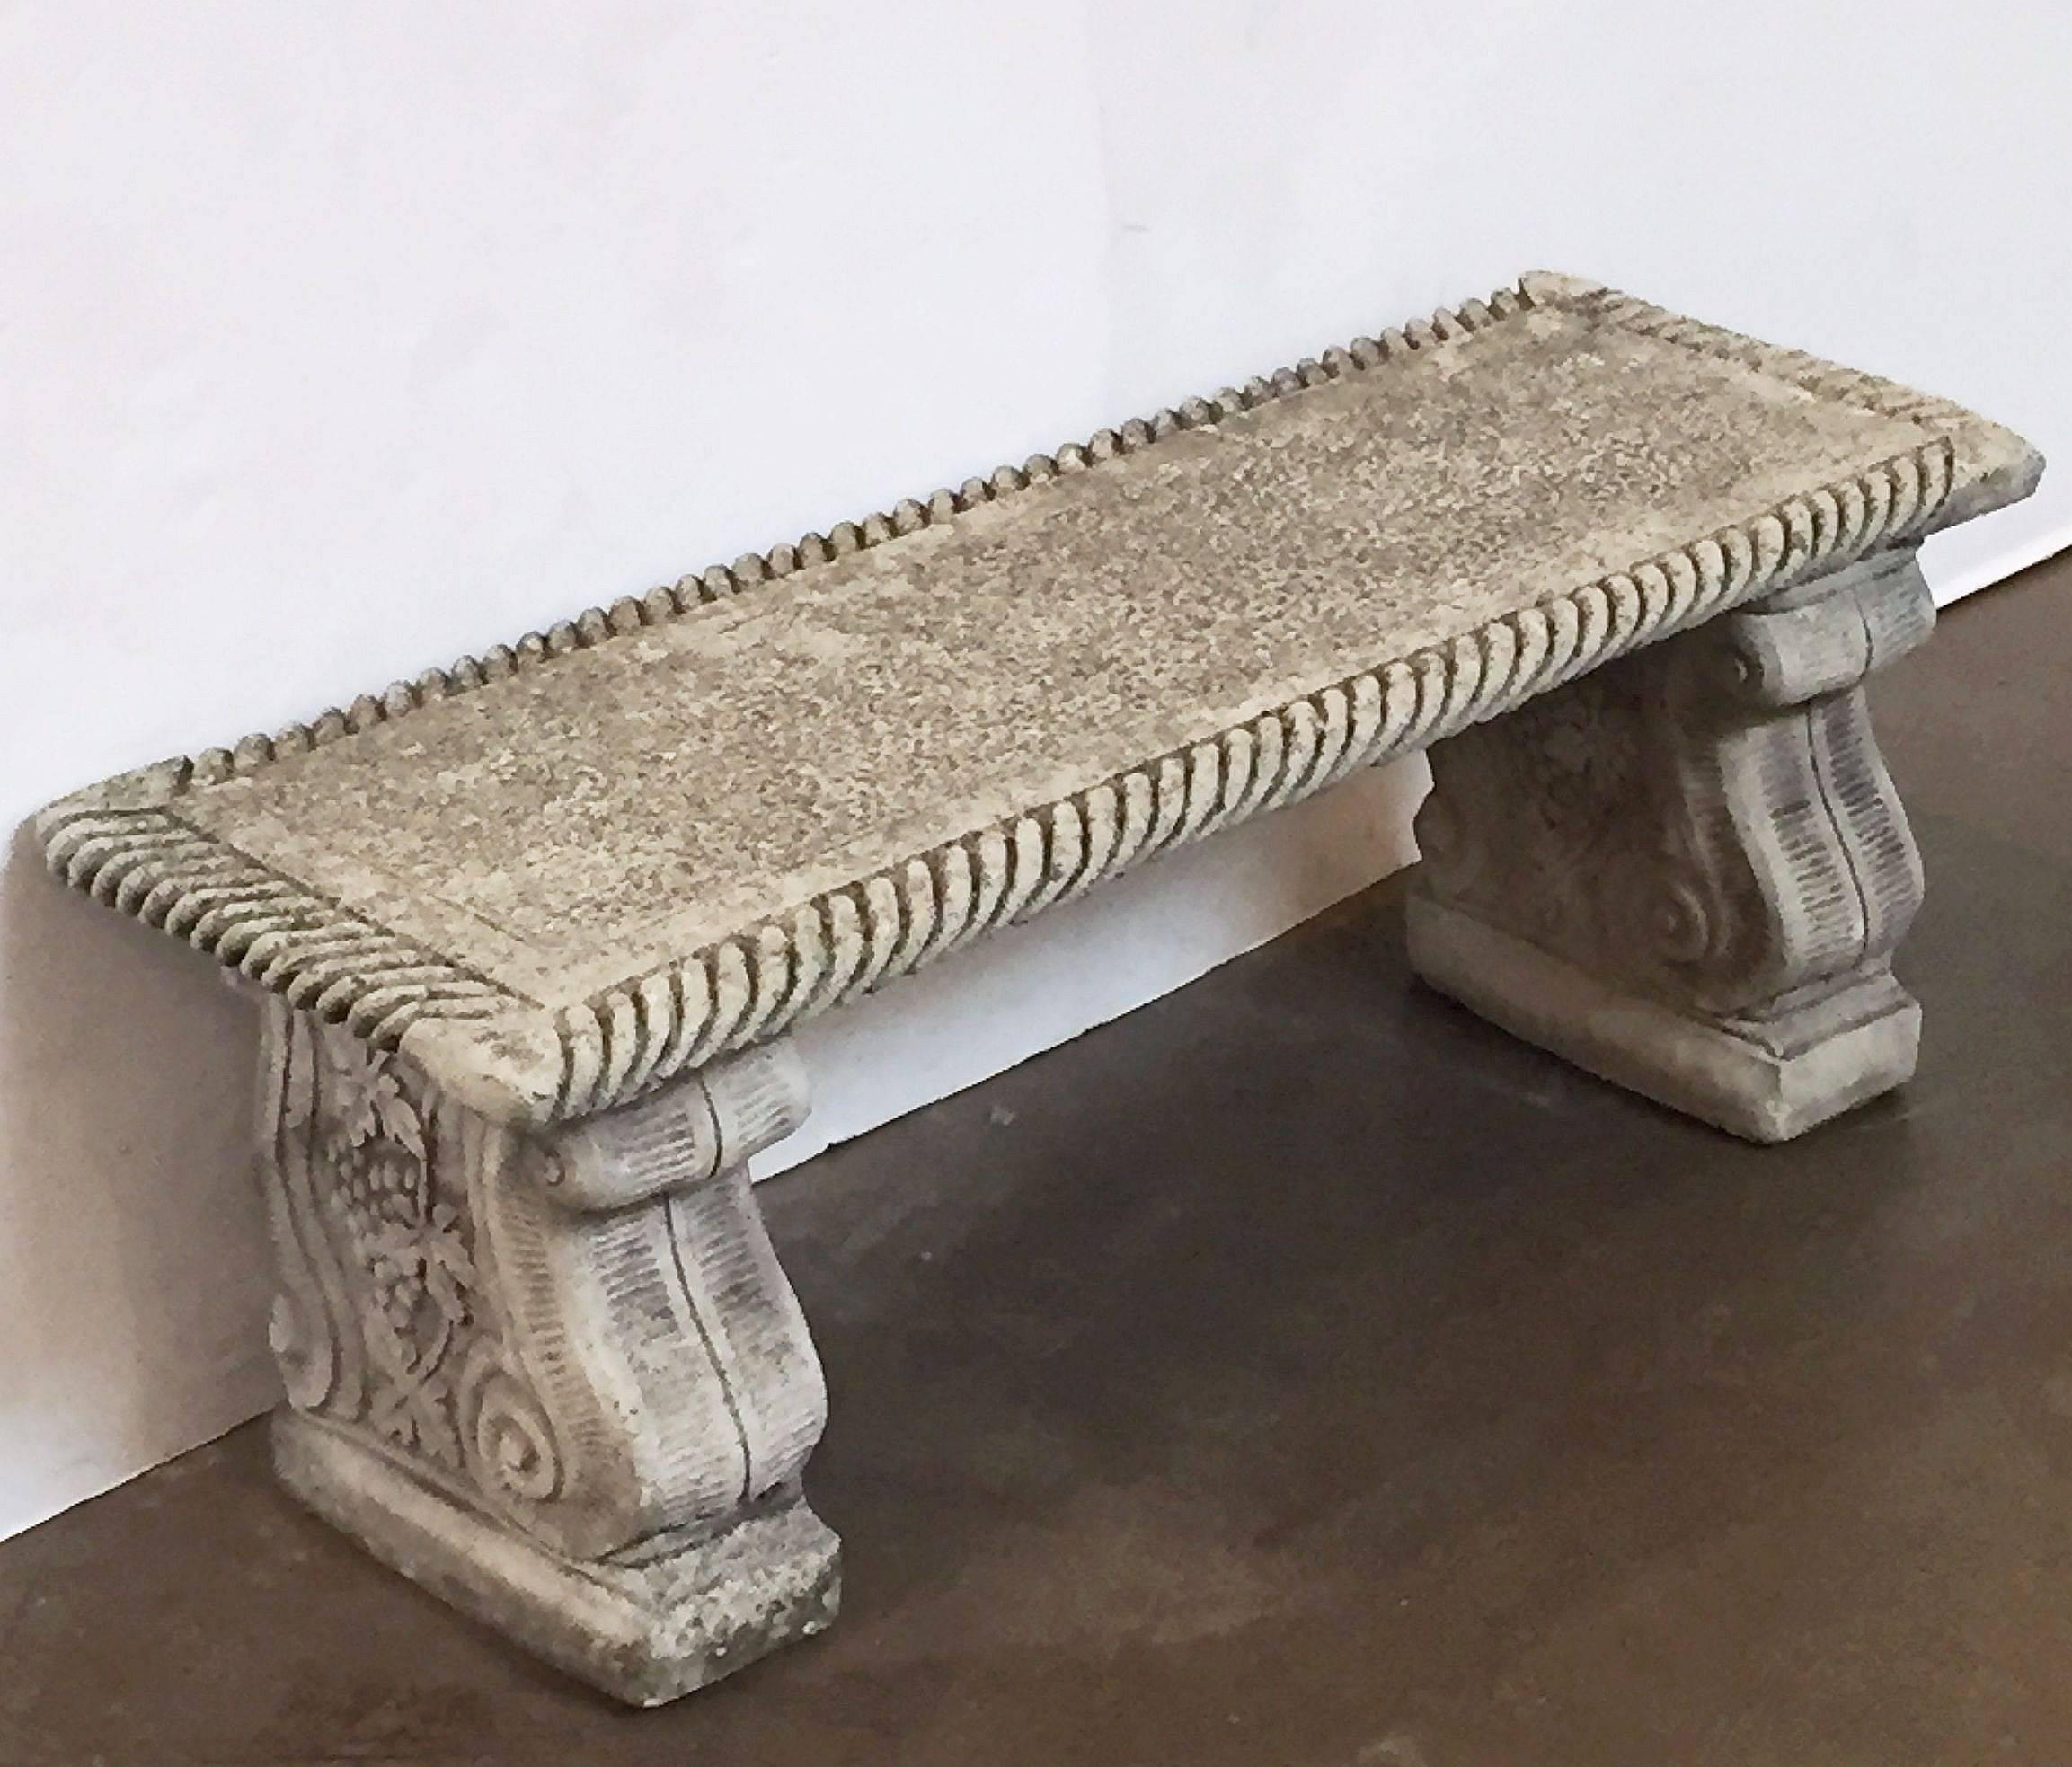 A handsome English garden long bench or seat of composition stone, featuring a gadroon-edge rectangular top set upon two scroll supports with a relief design of grapes and grape leaves.

Dimensions: H 16